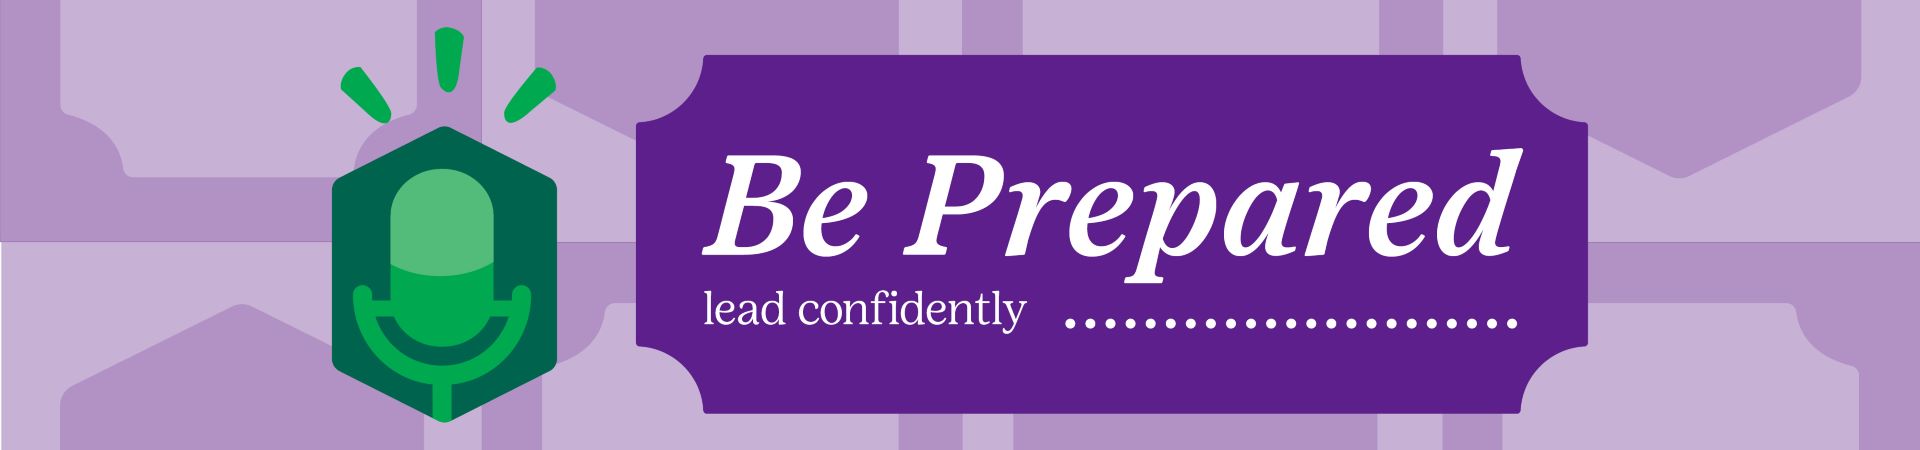  A microphone illustration next to the words "Be Prepared: Lead Confidently" 